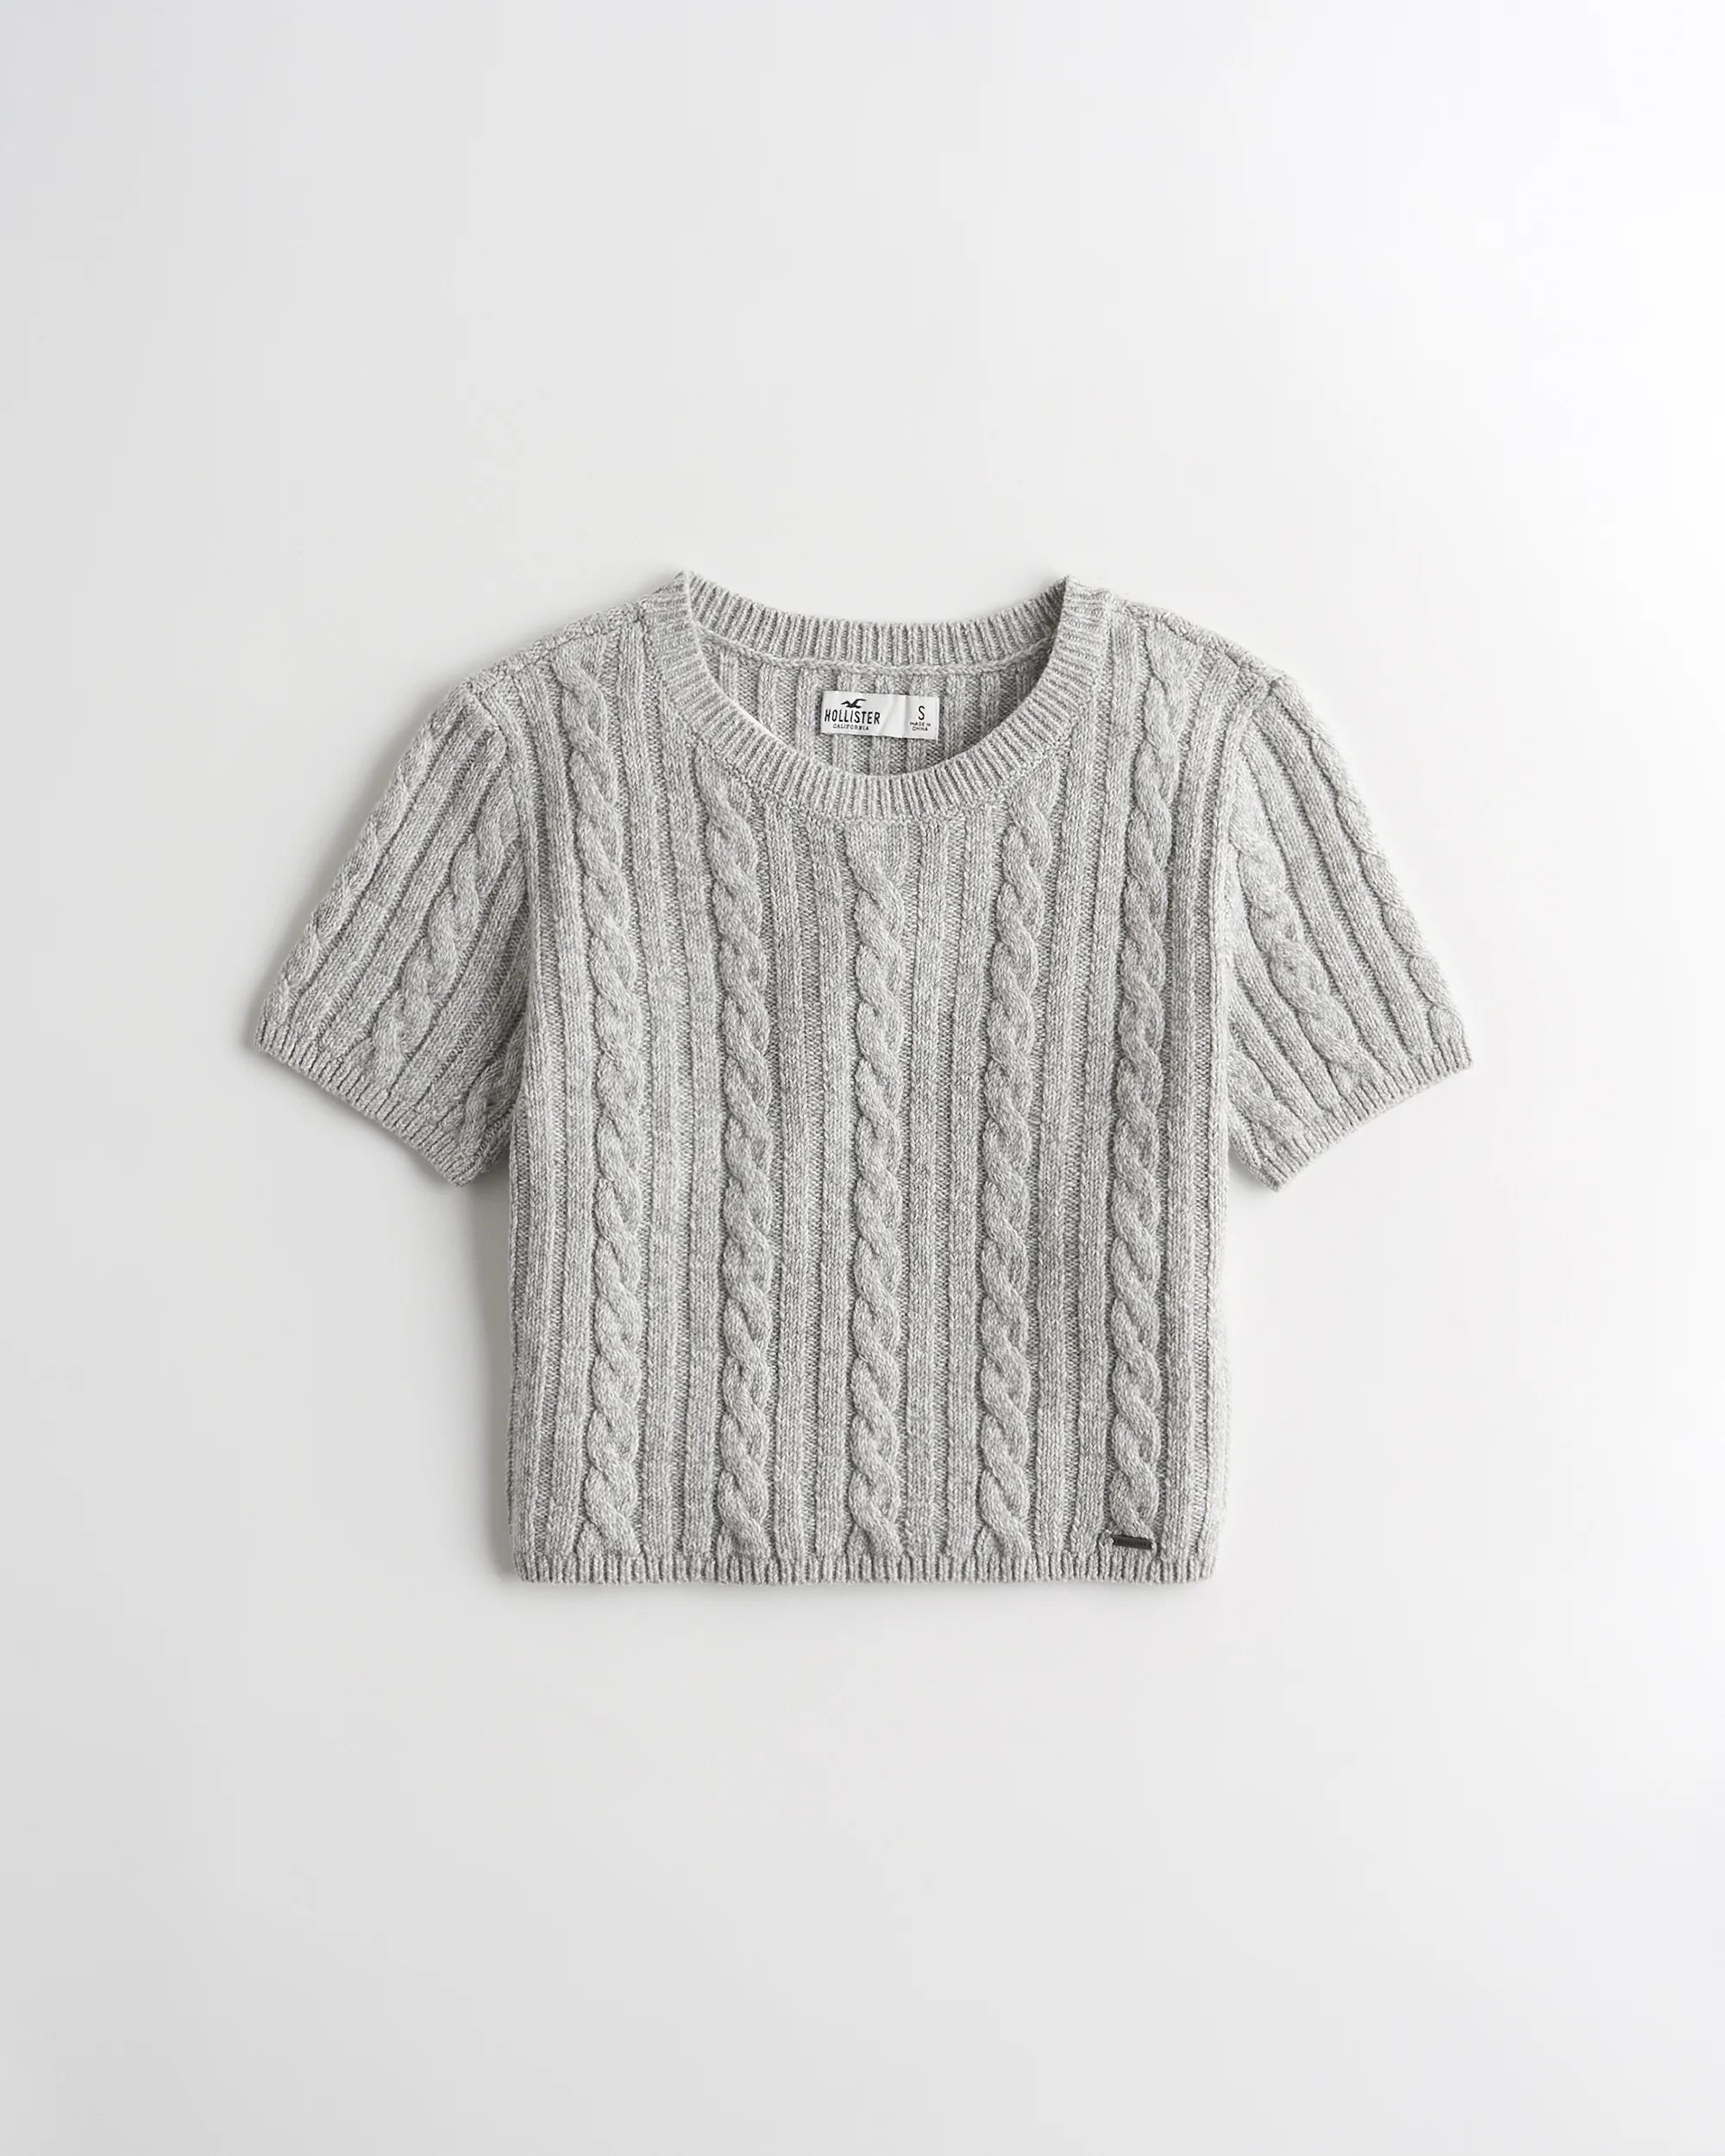 Girls Cable Crop Sweater Tee from Hollister | Hollister (US)